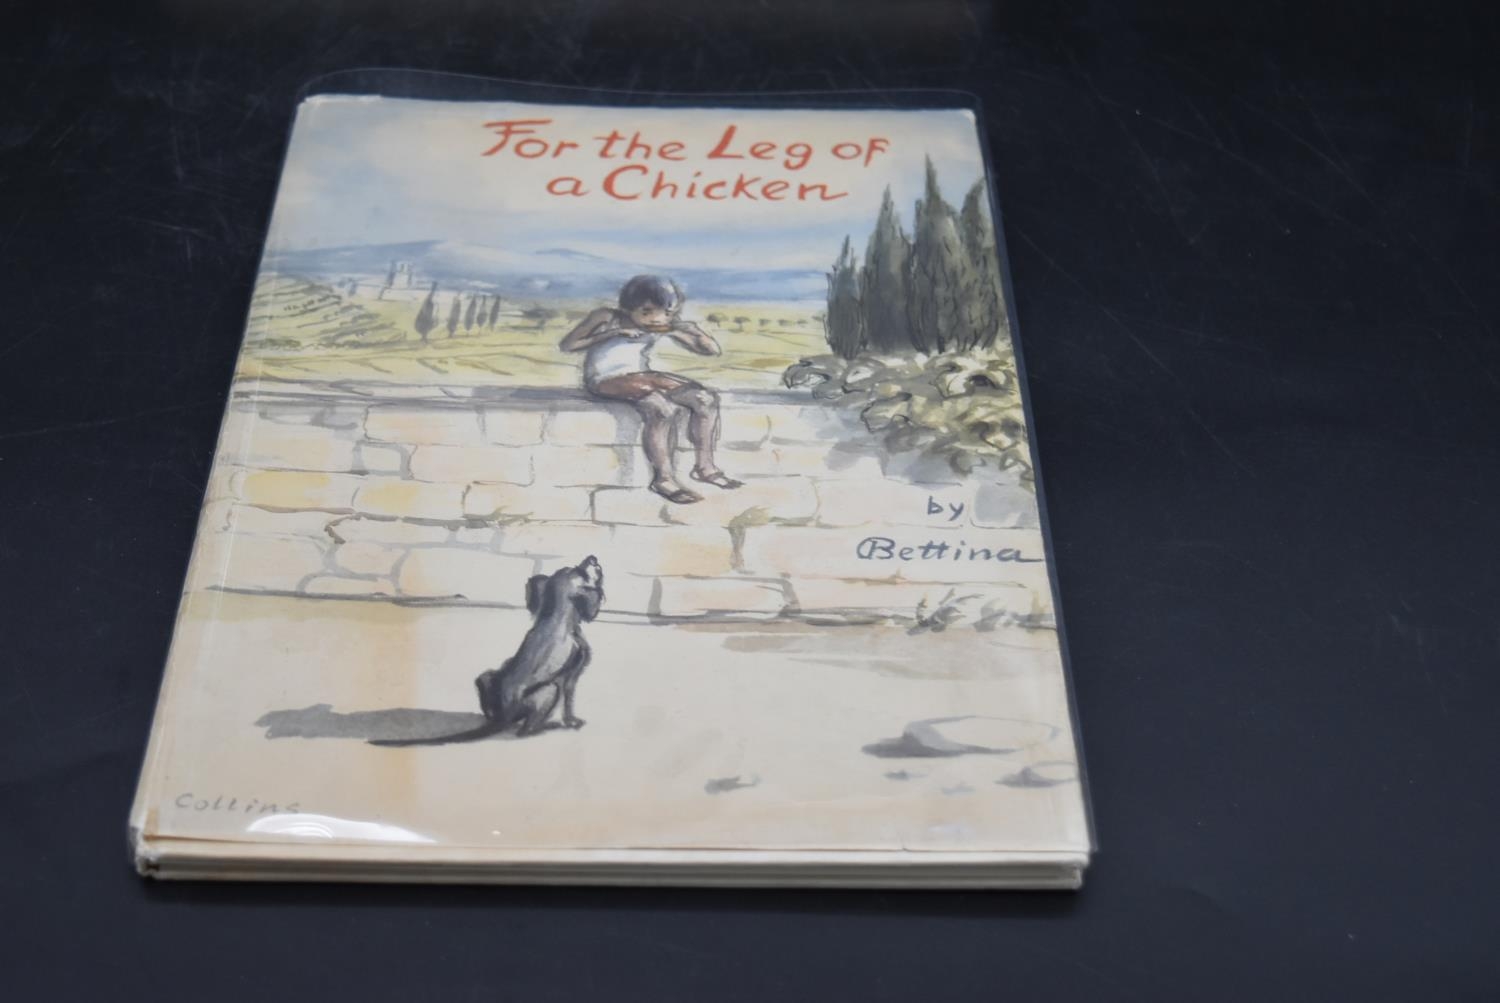 Two first edition books: Brought Forward by H. M. Bateman and For the Leg of a Chicken by Bettina - Image 2 of 9